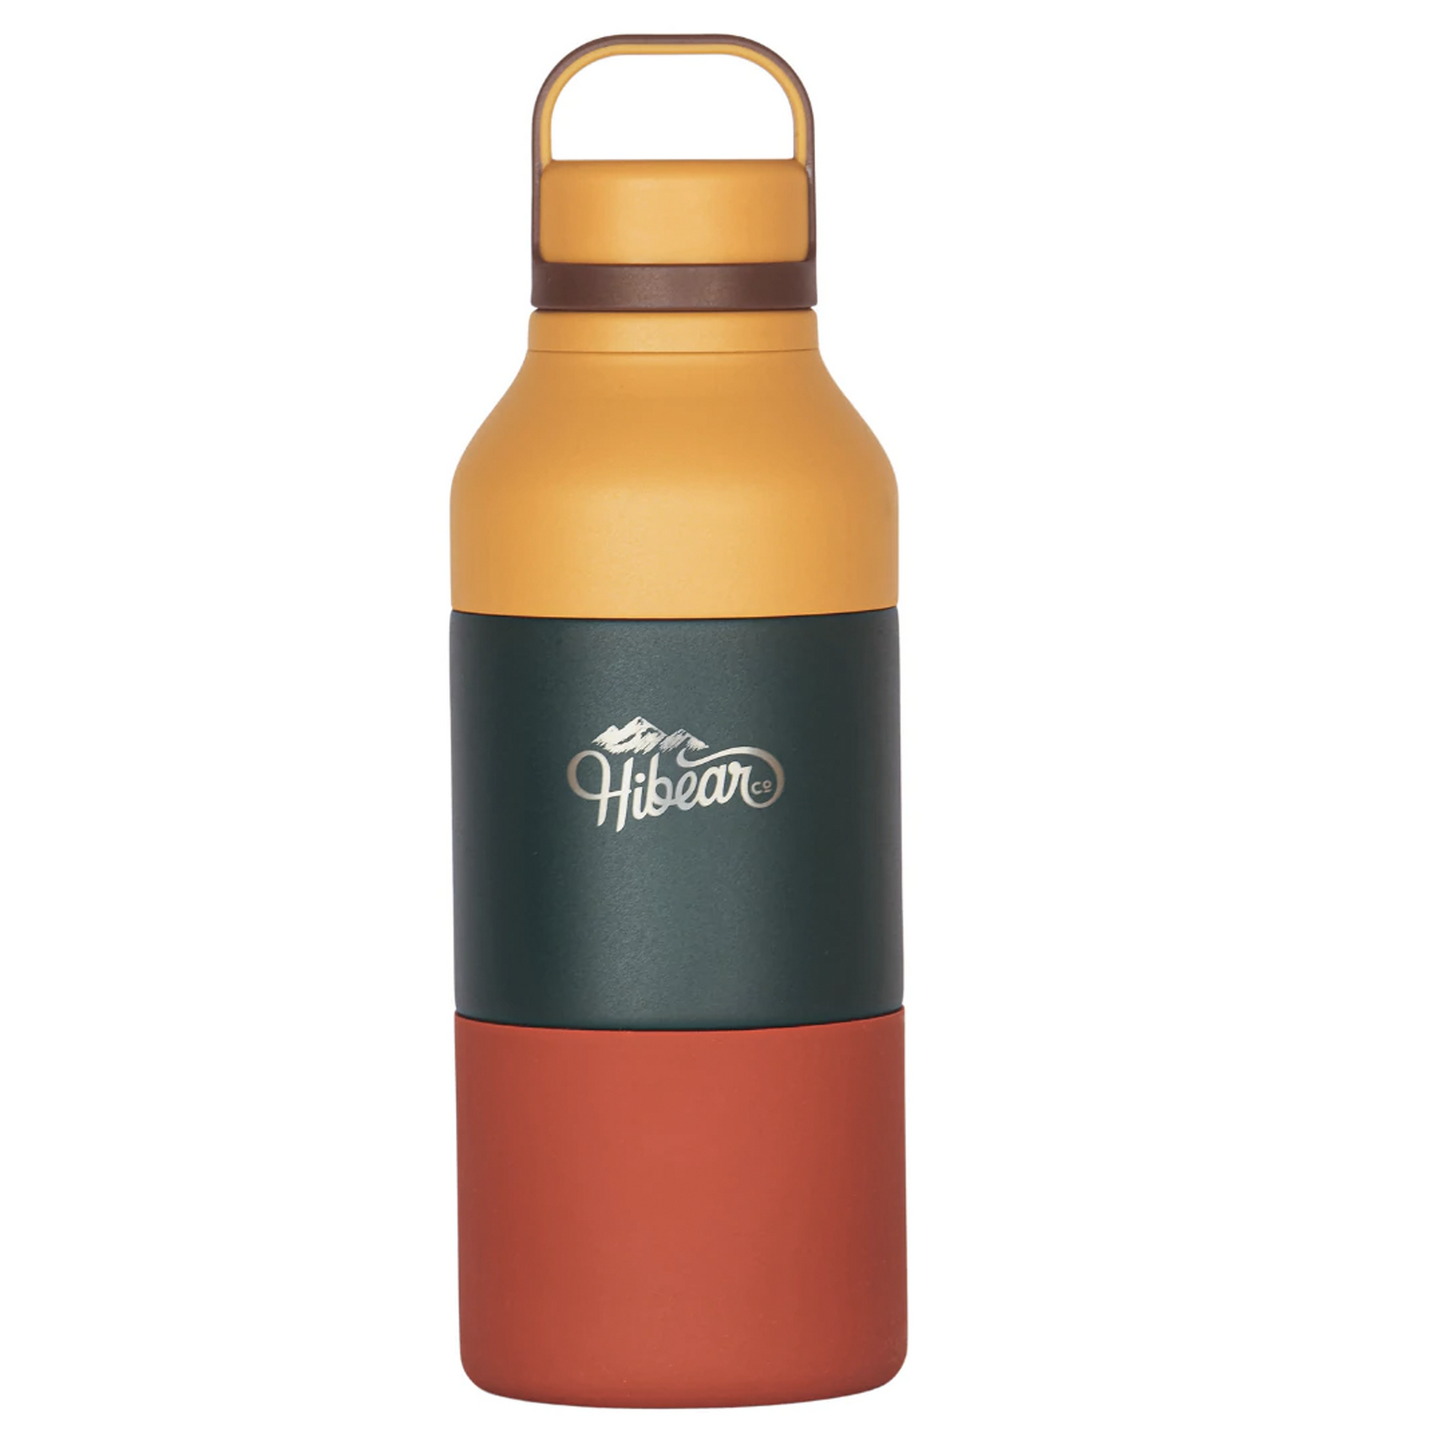 All-Day Adventure Flask Big Adventure Outfitters